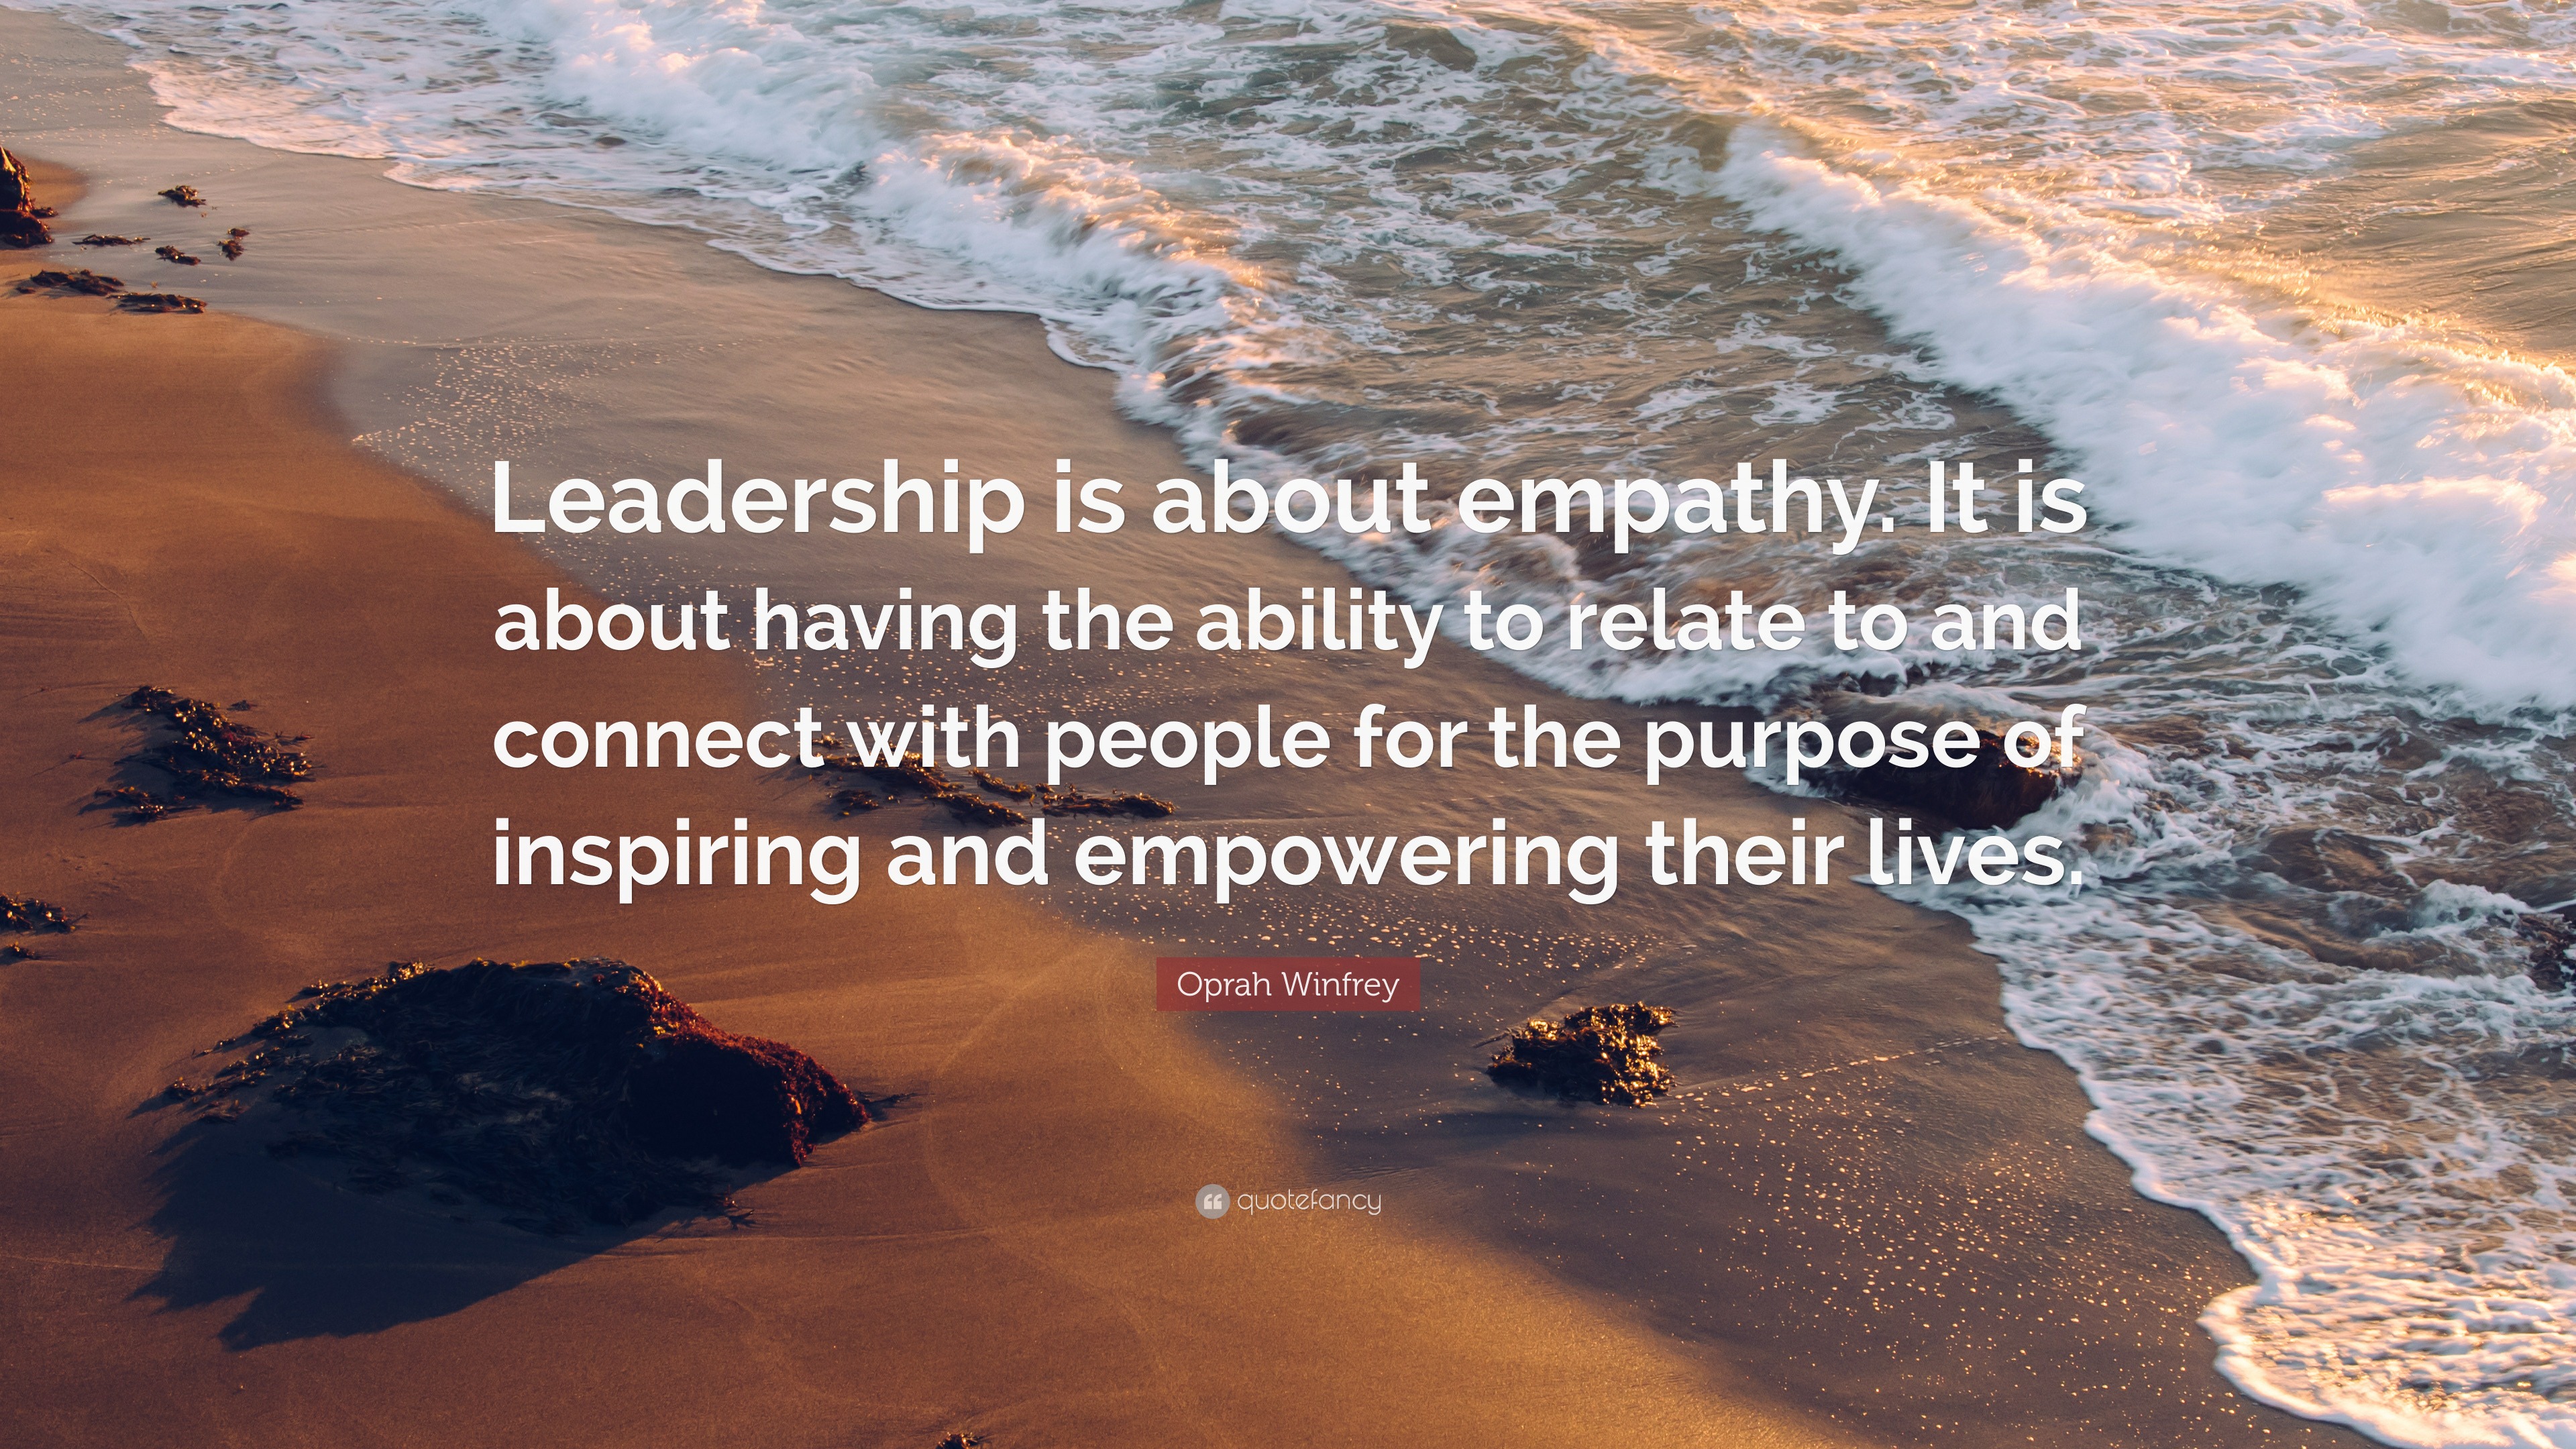 Oprah Winfrey Quote: “Leadership is about empathy. It is about having